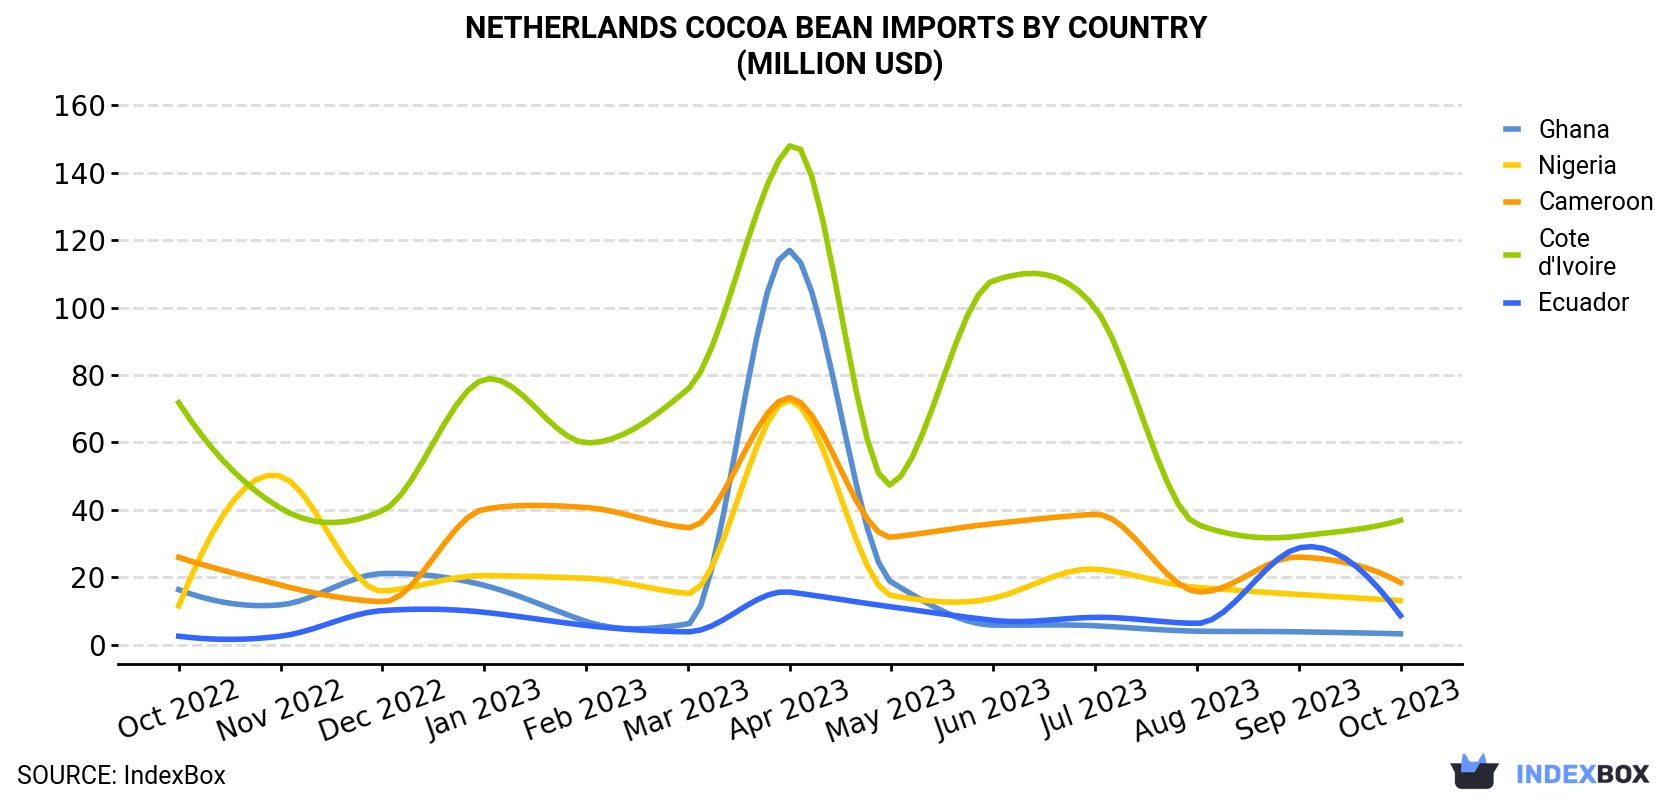 Netherlands Cocoa Bean Imports By Country (Million USD)